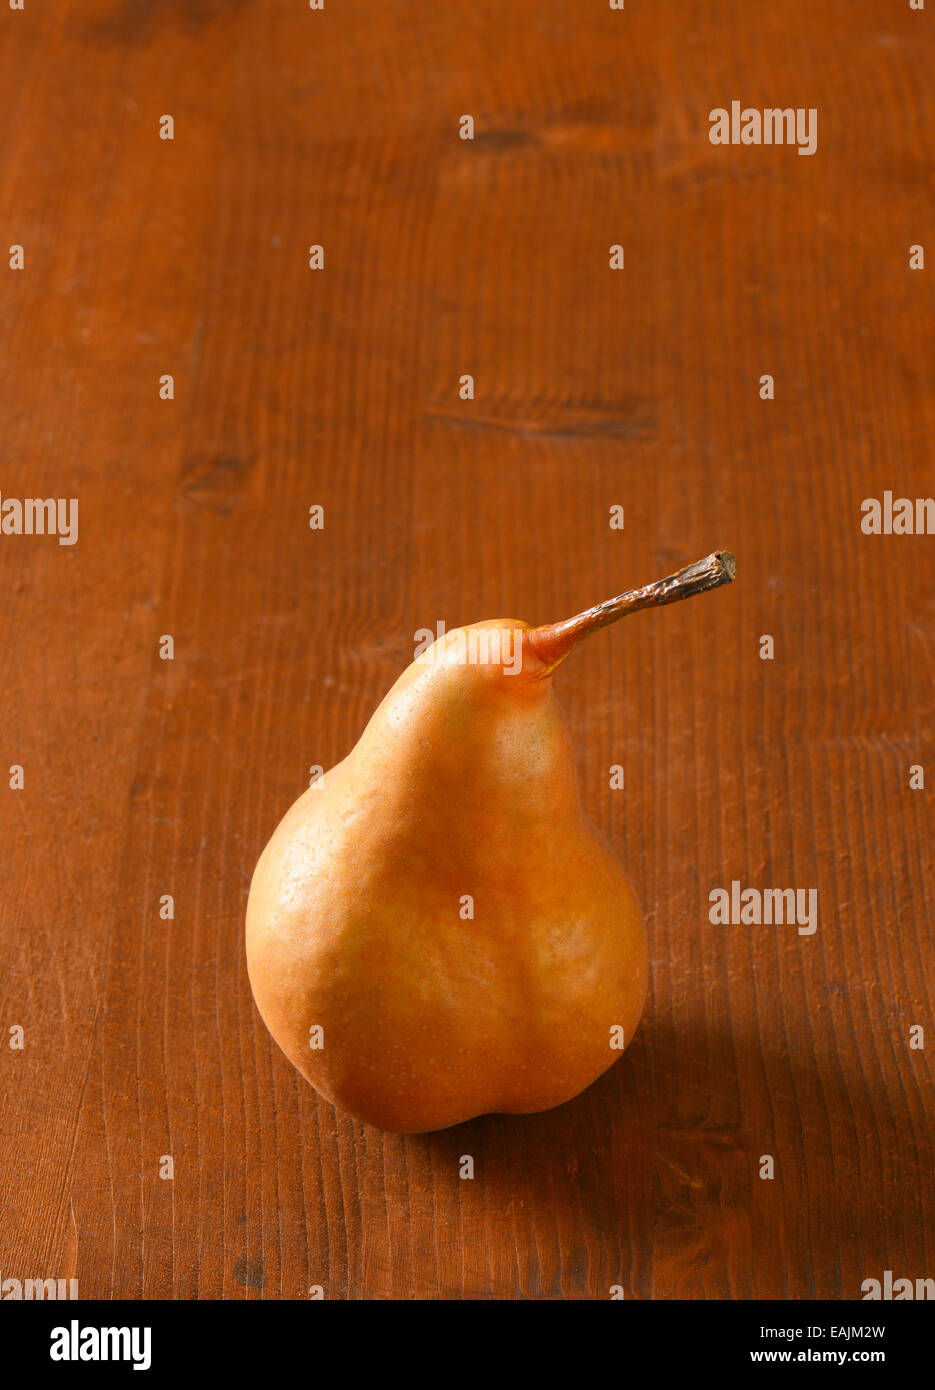 European pear with elongated slender neck and russeted skin Stock Photo